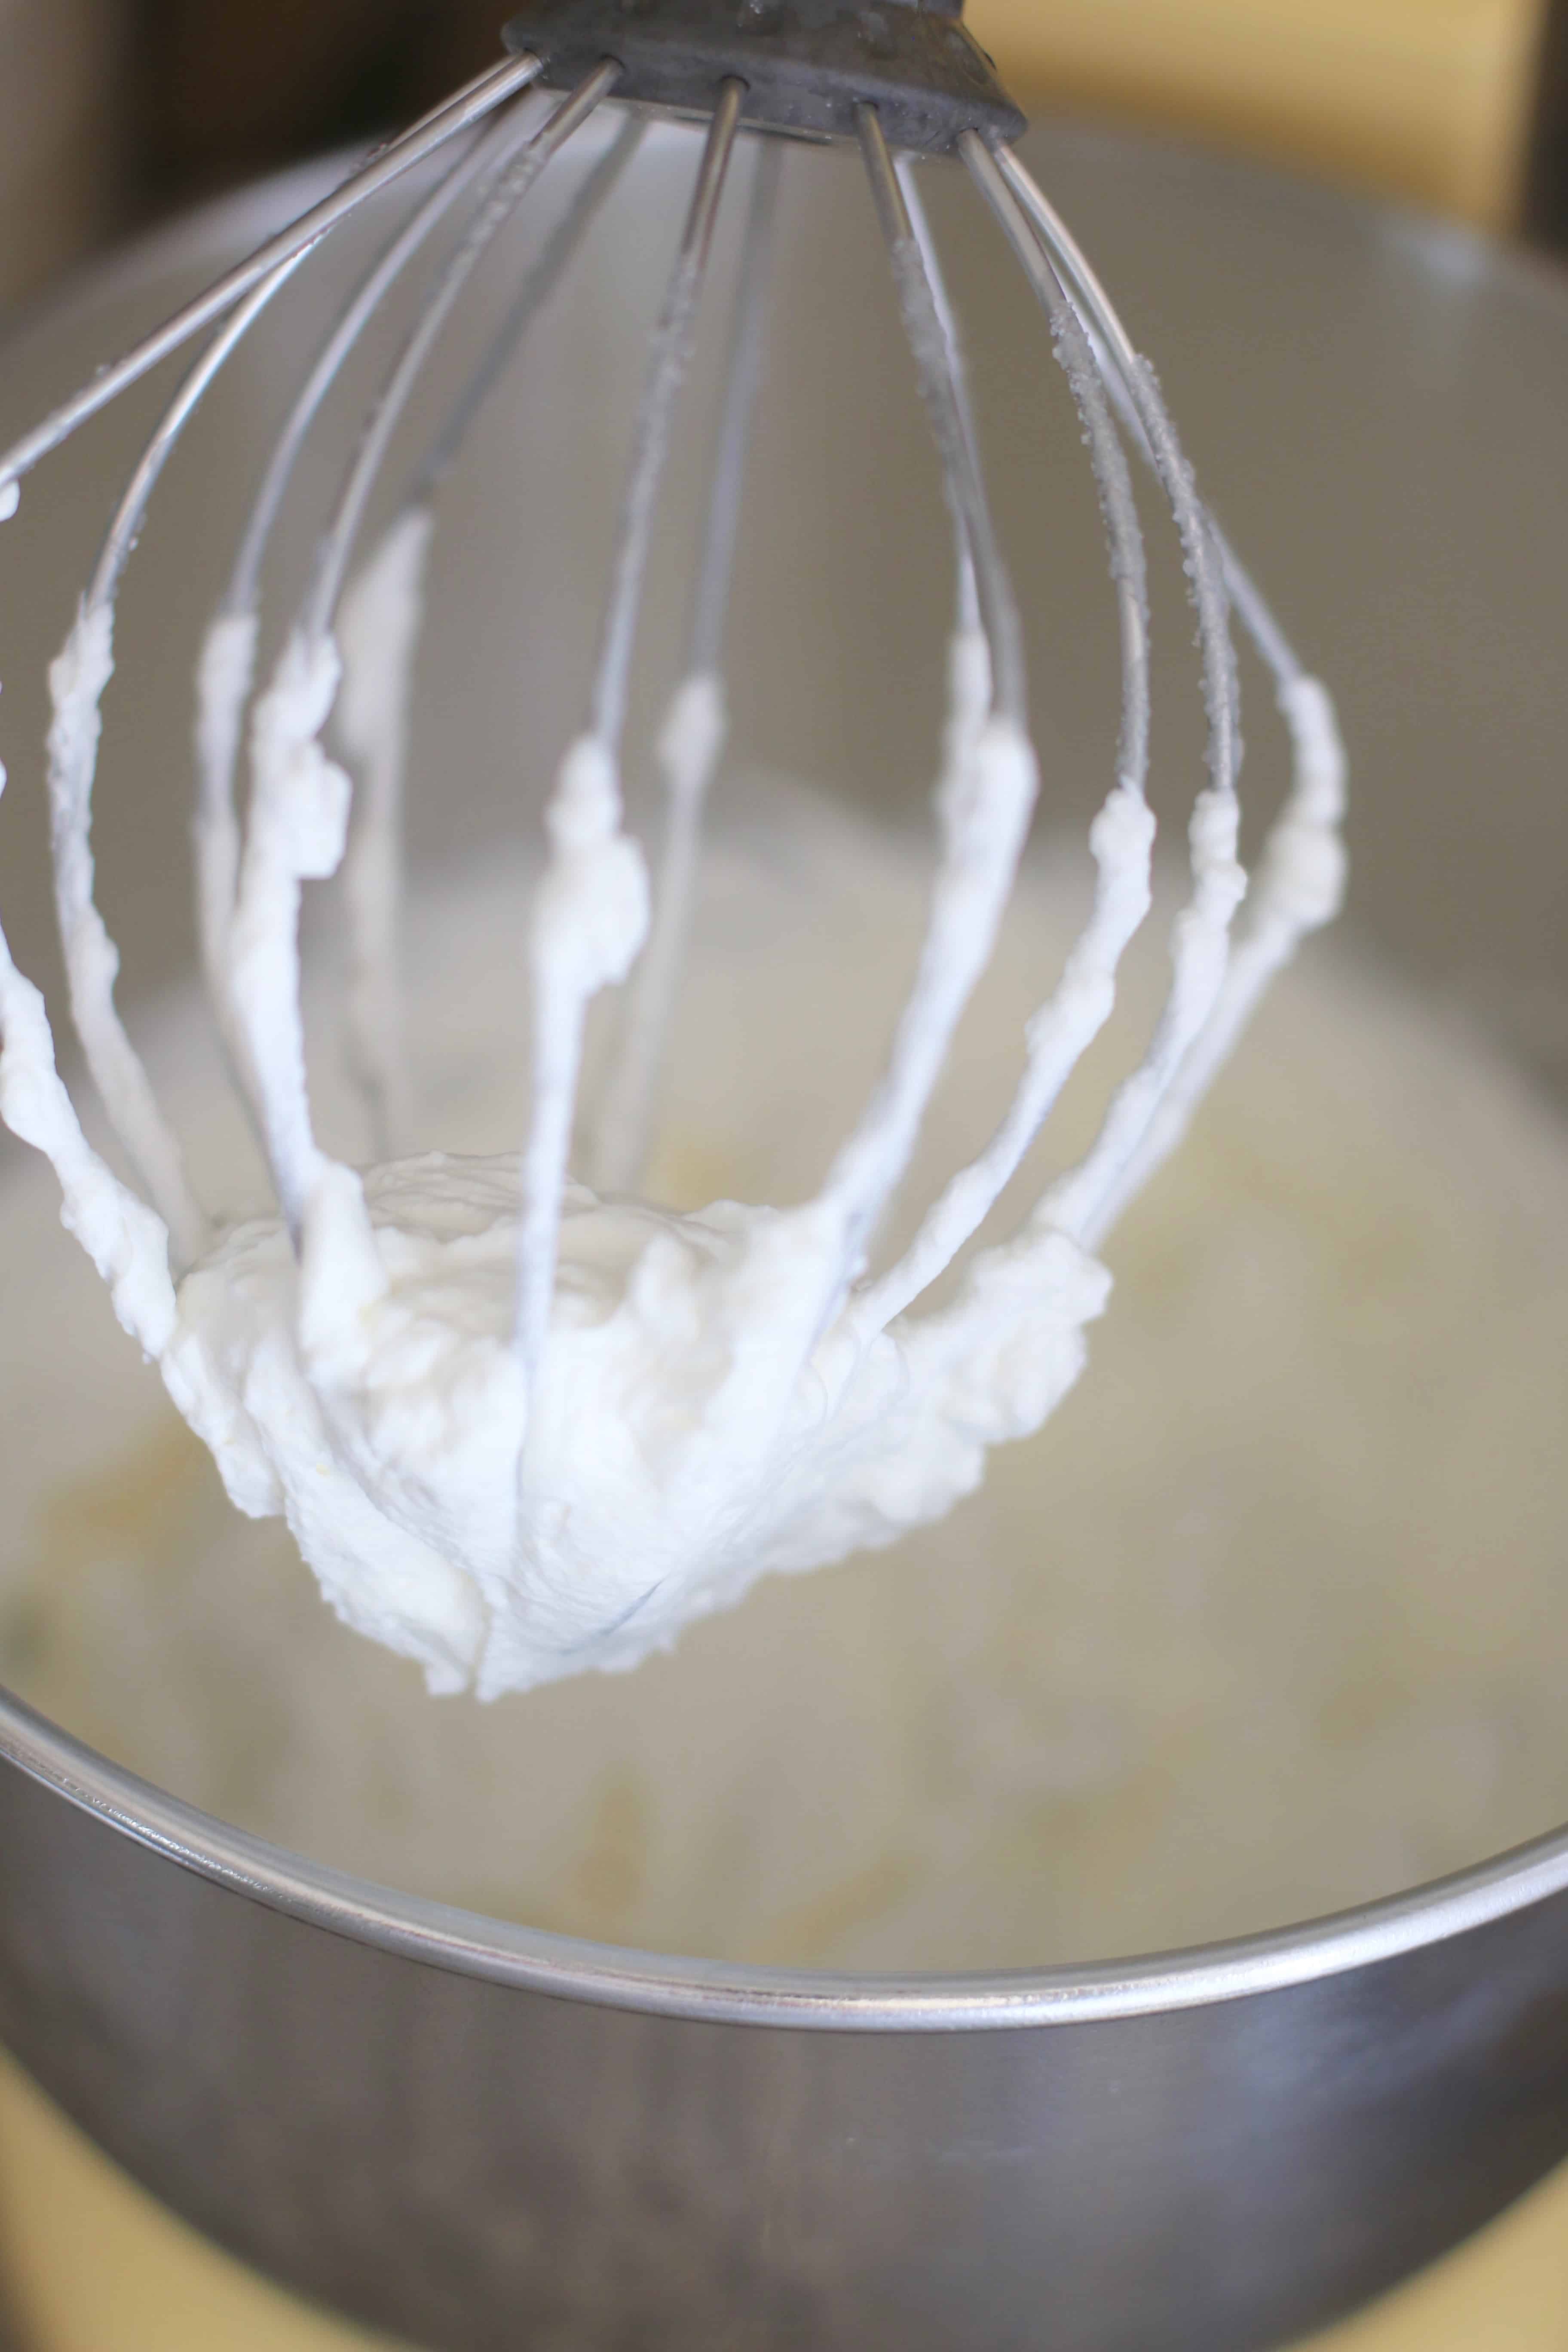 making homemade whipped cream in a stand mixer.